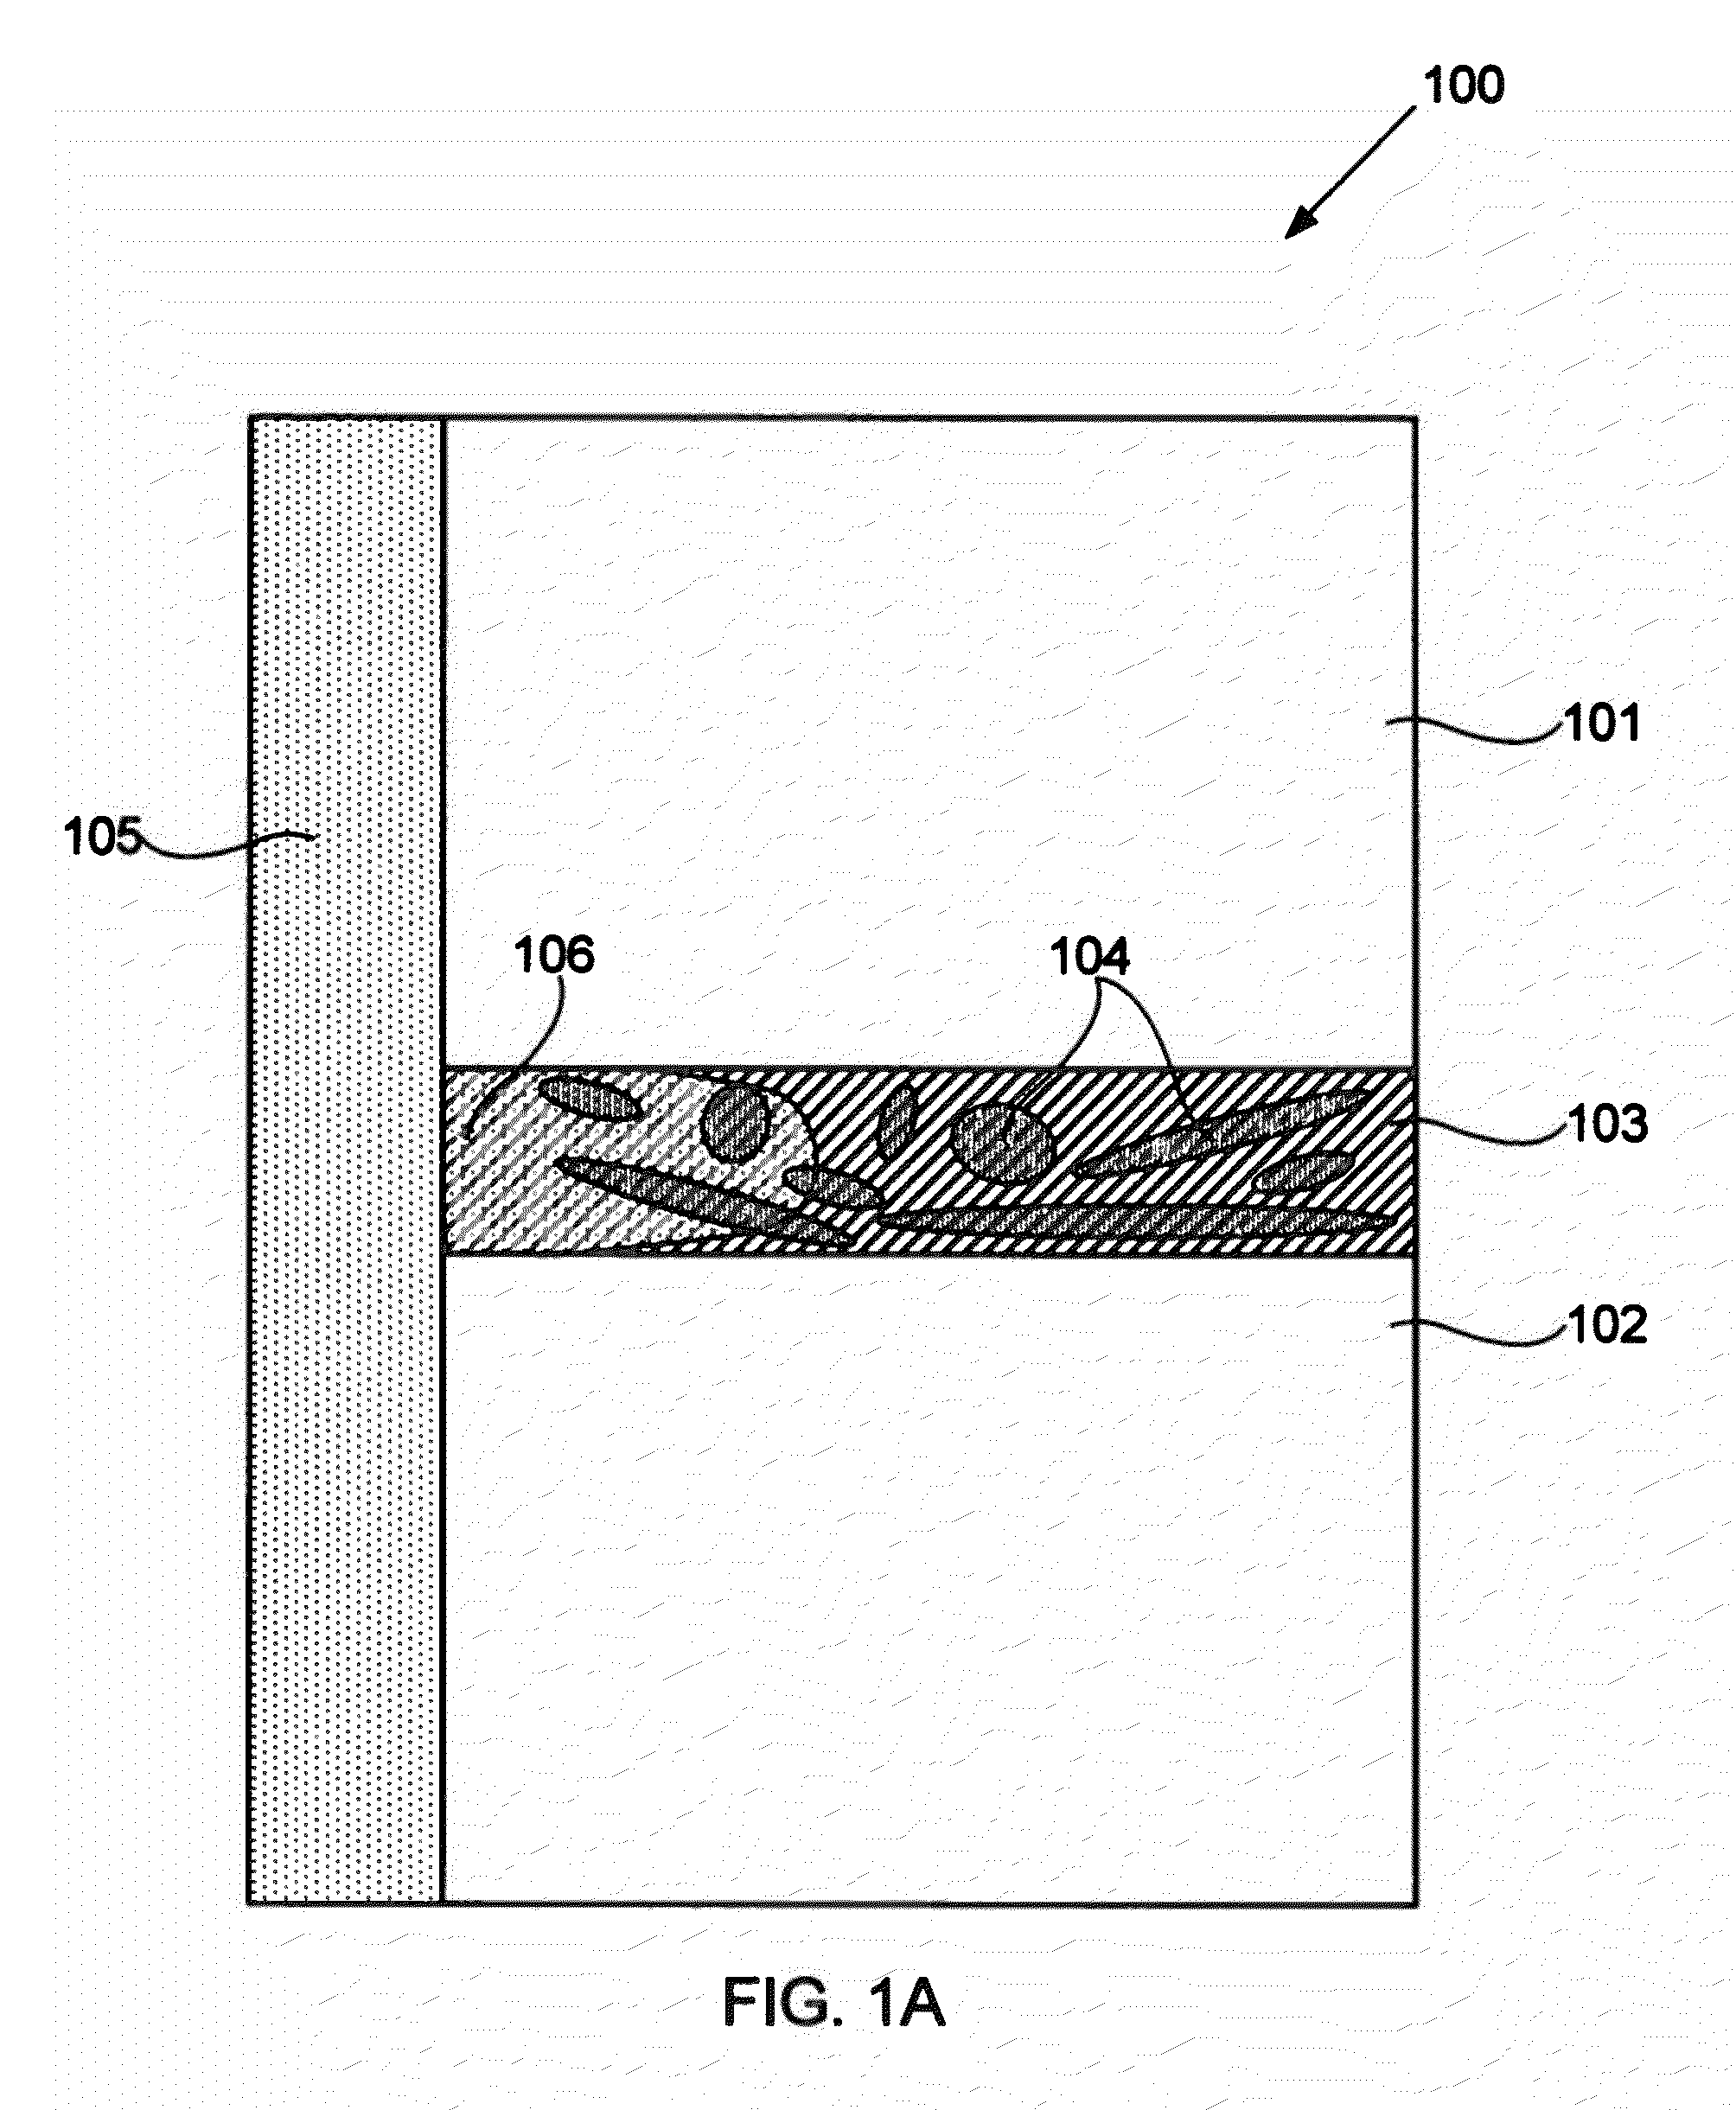 High durability joints between ceramic articles, and methods of making and using same